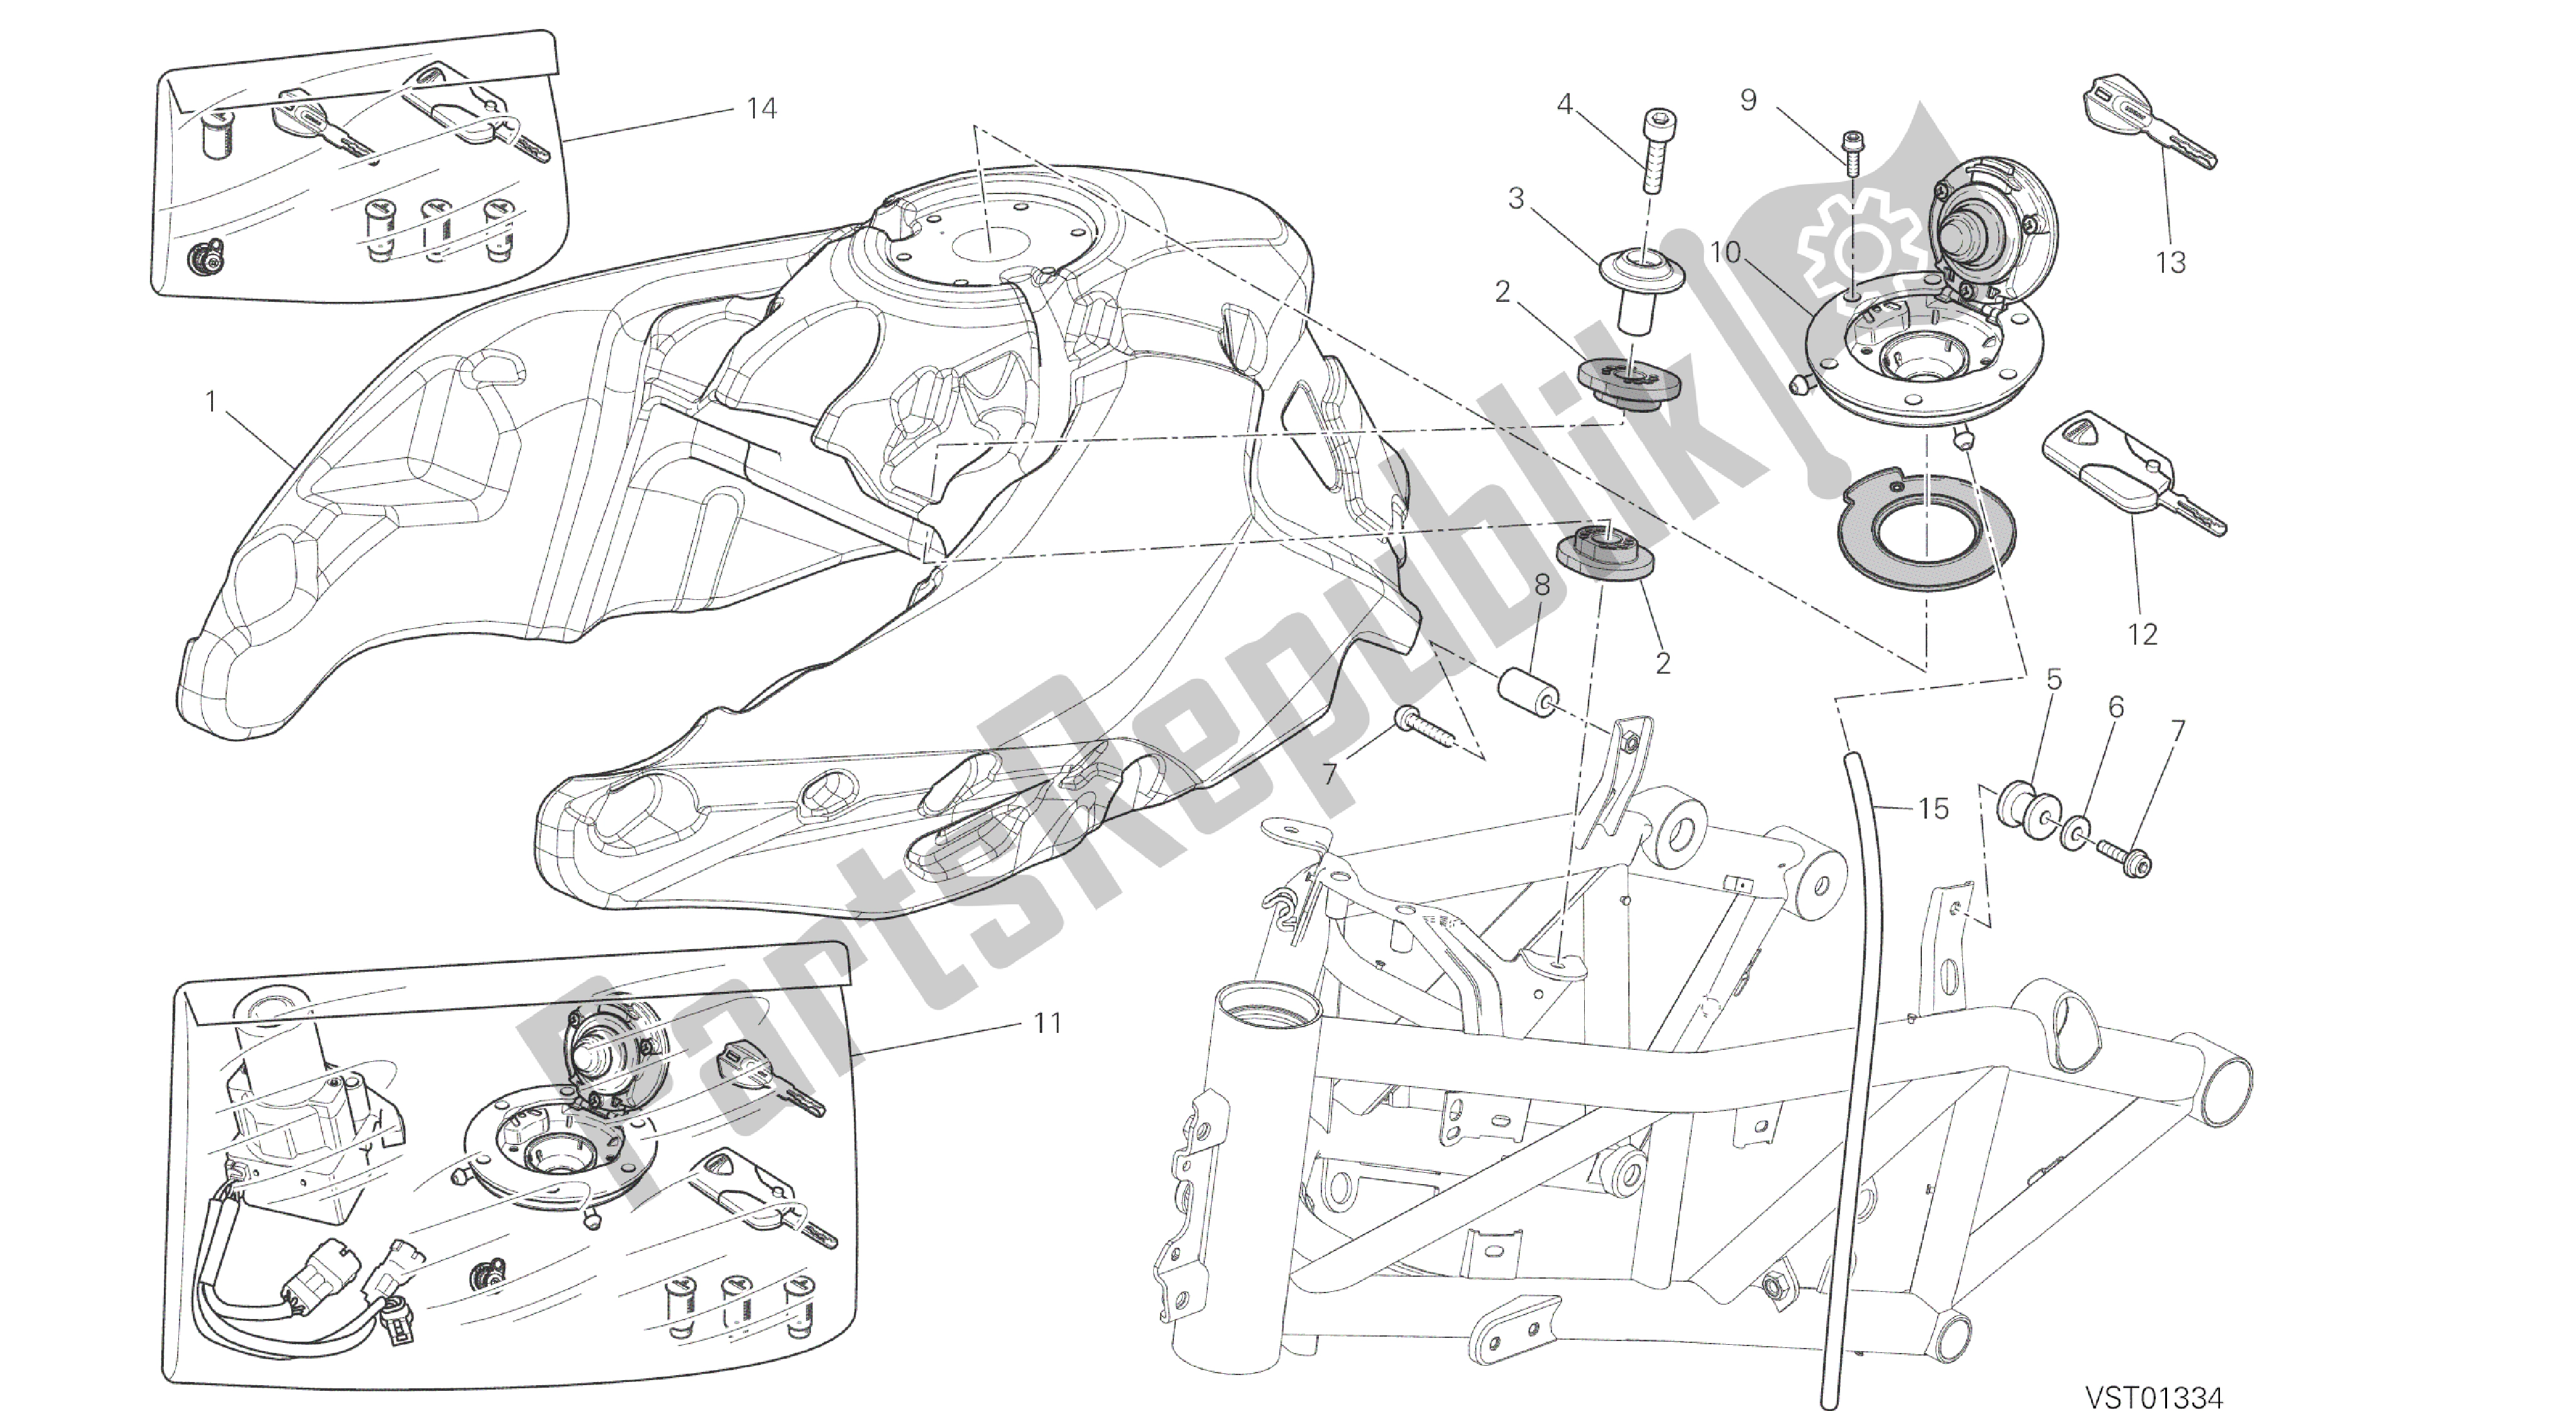 All parts for the Drawing 032 - Fuel Tank [mod:ms1200st;xst:chn,tha]group Frame of the Ducati Multistrada S Touring 1200 2014